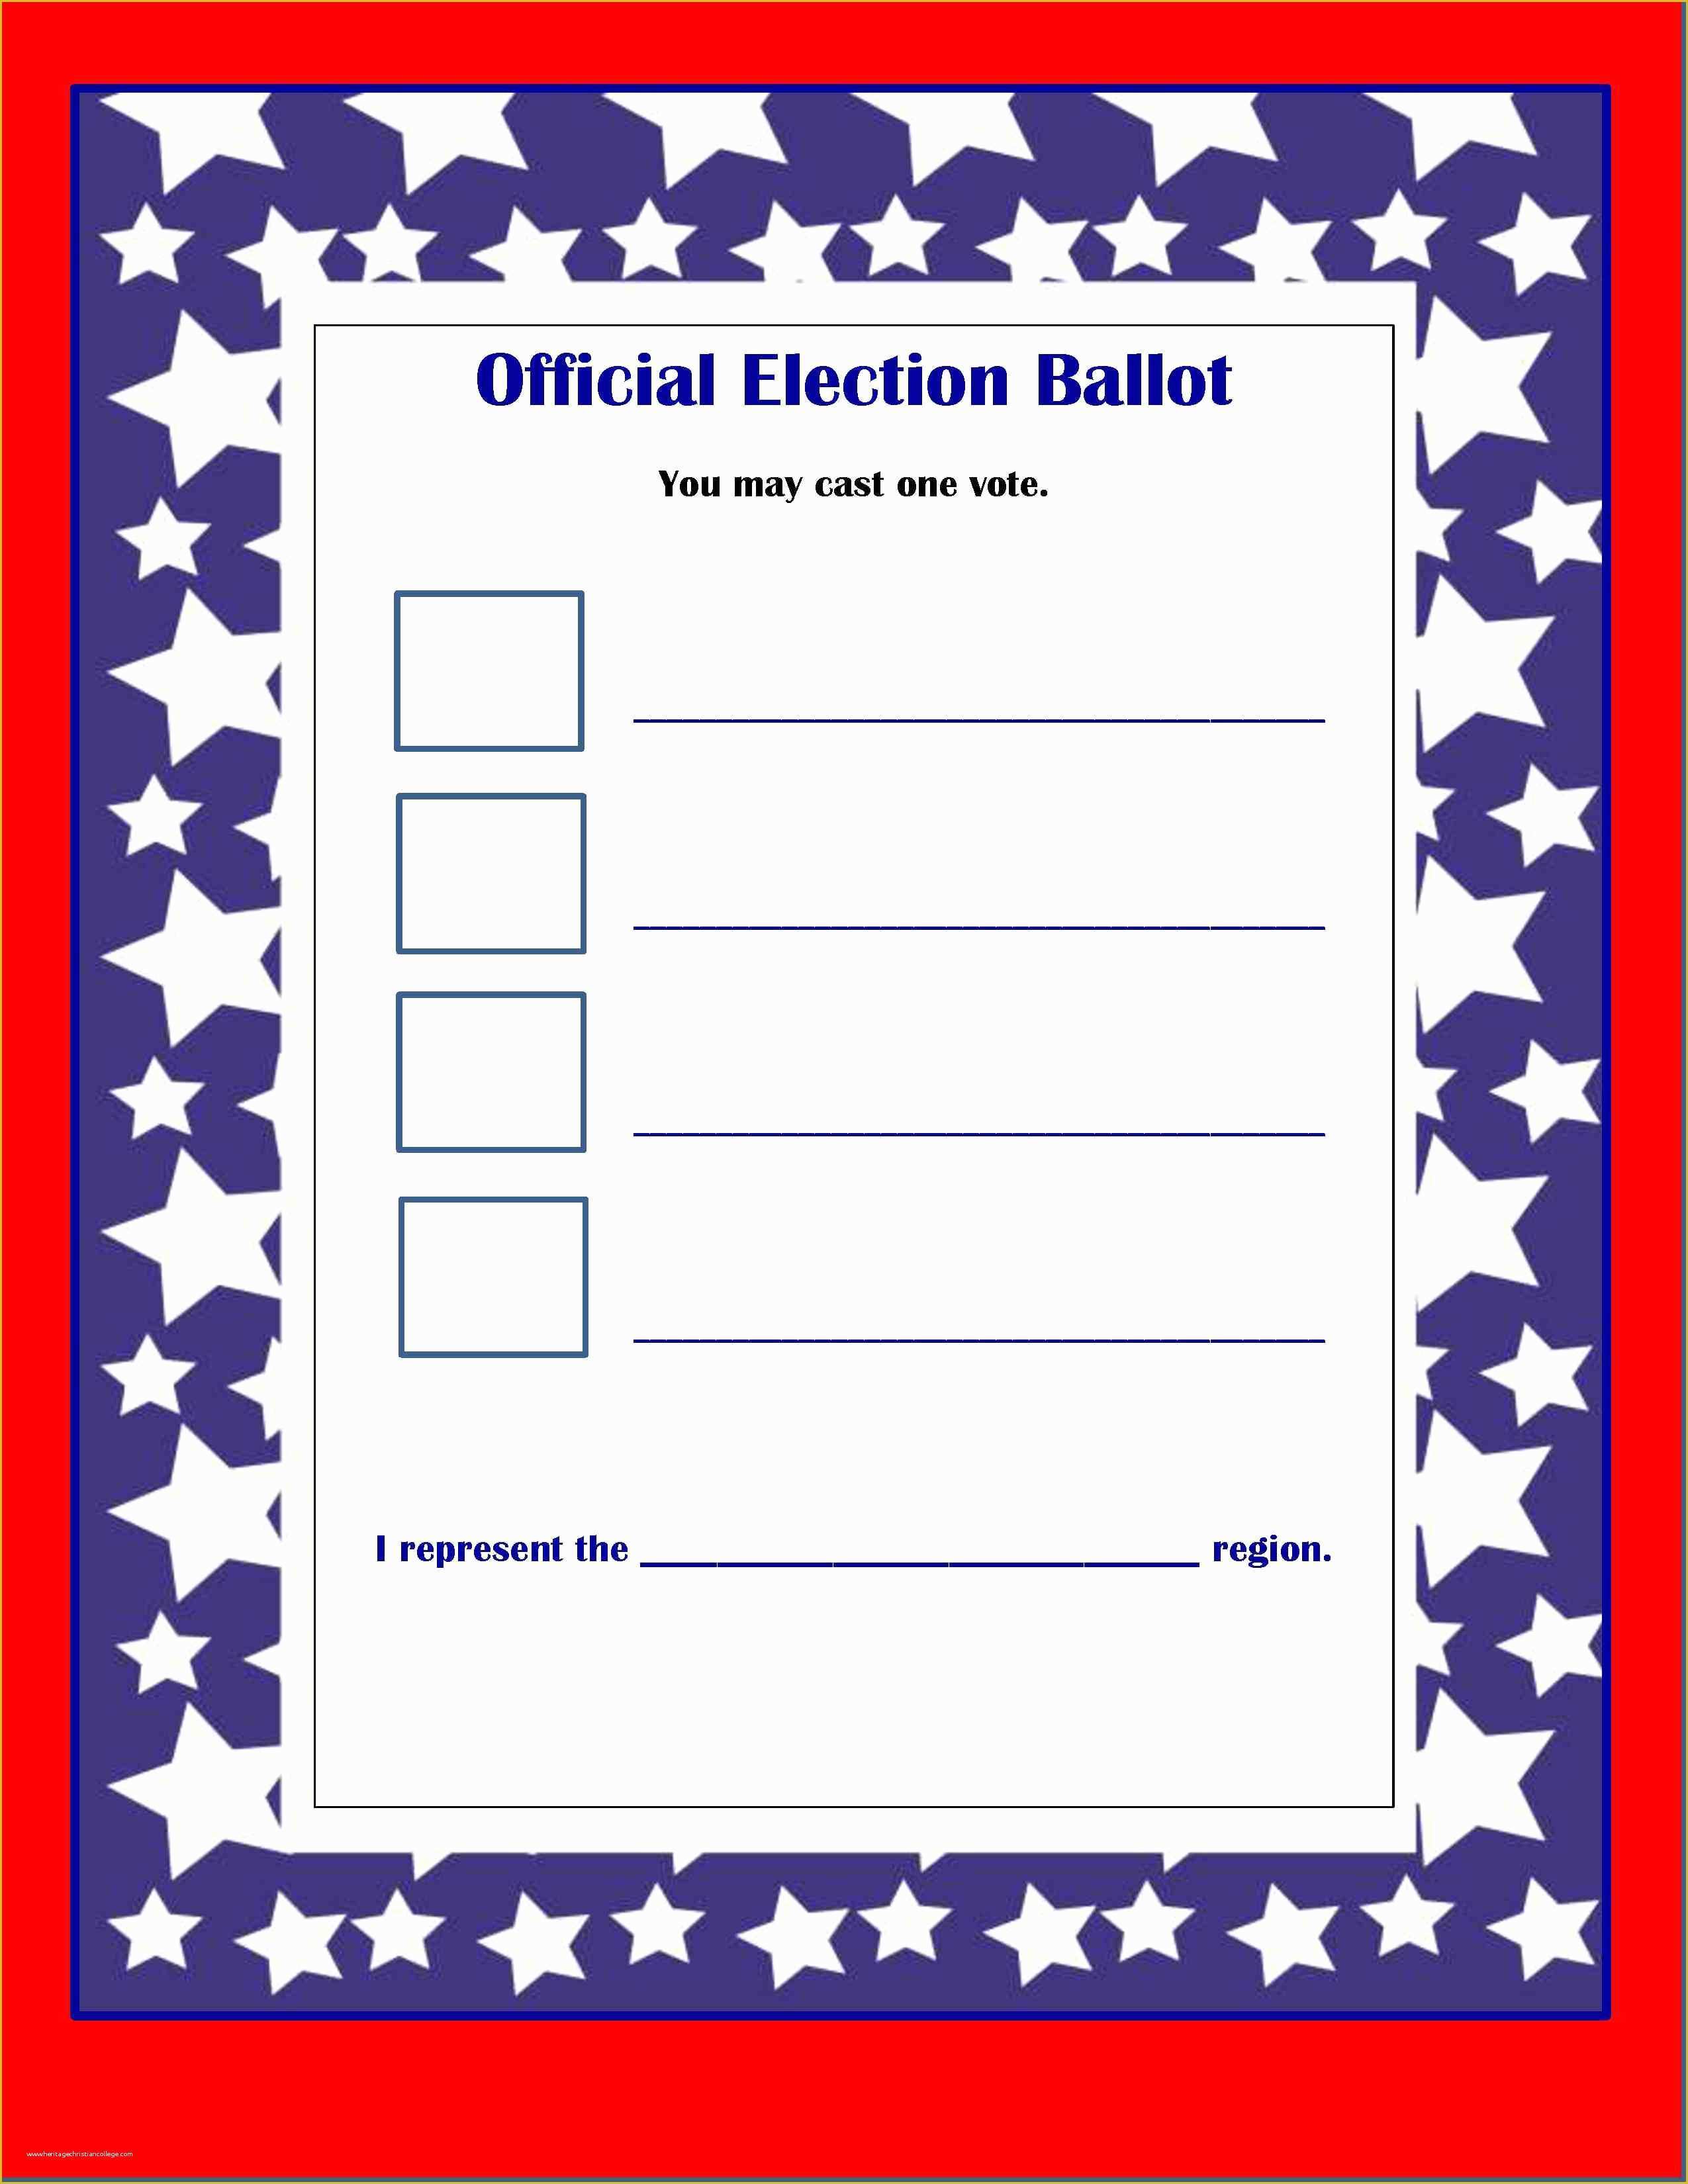 Free Voting form Template Of Election 2012 May the Best Character Win Part 2